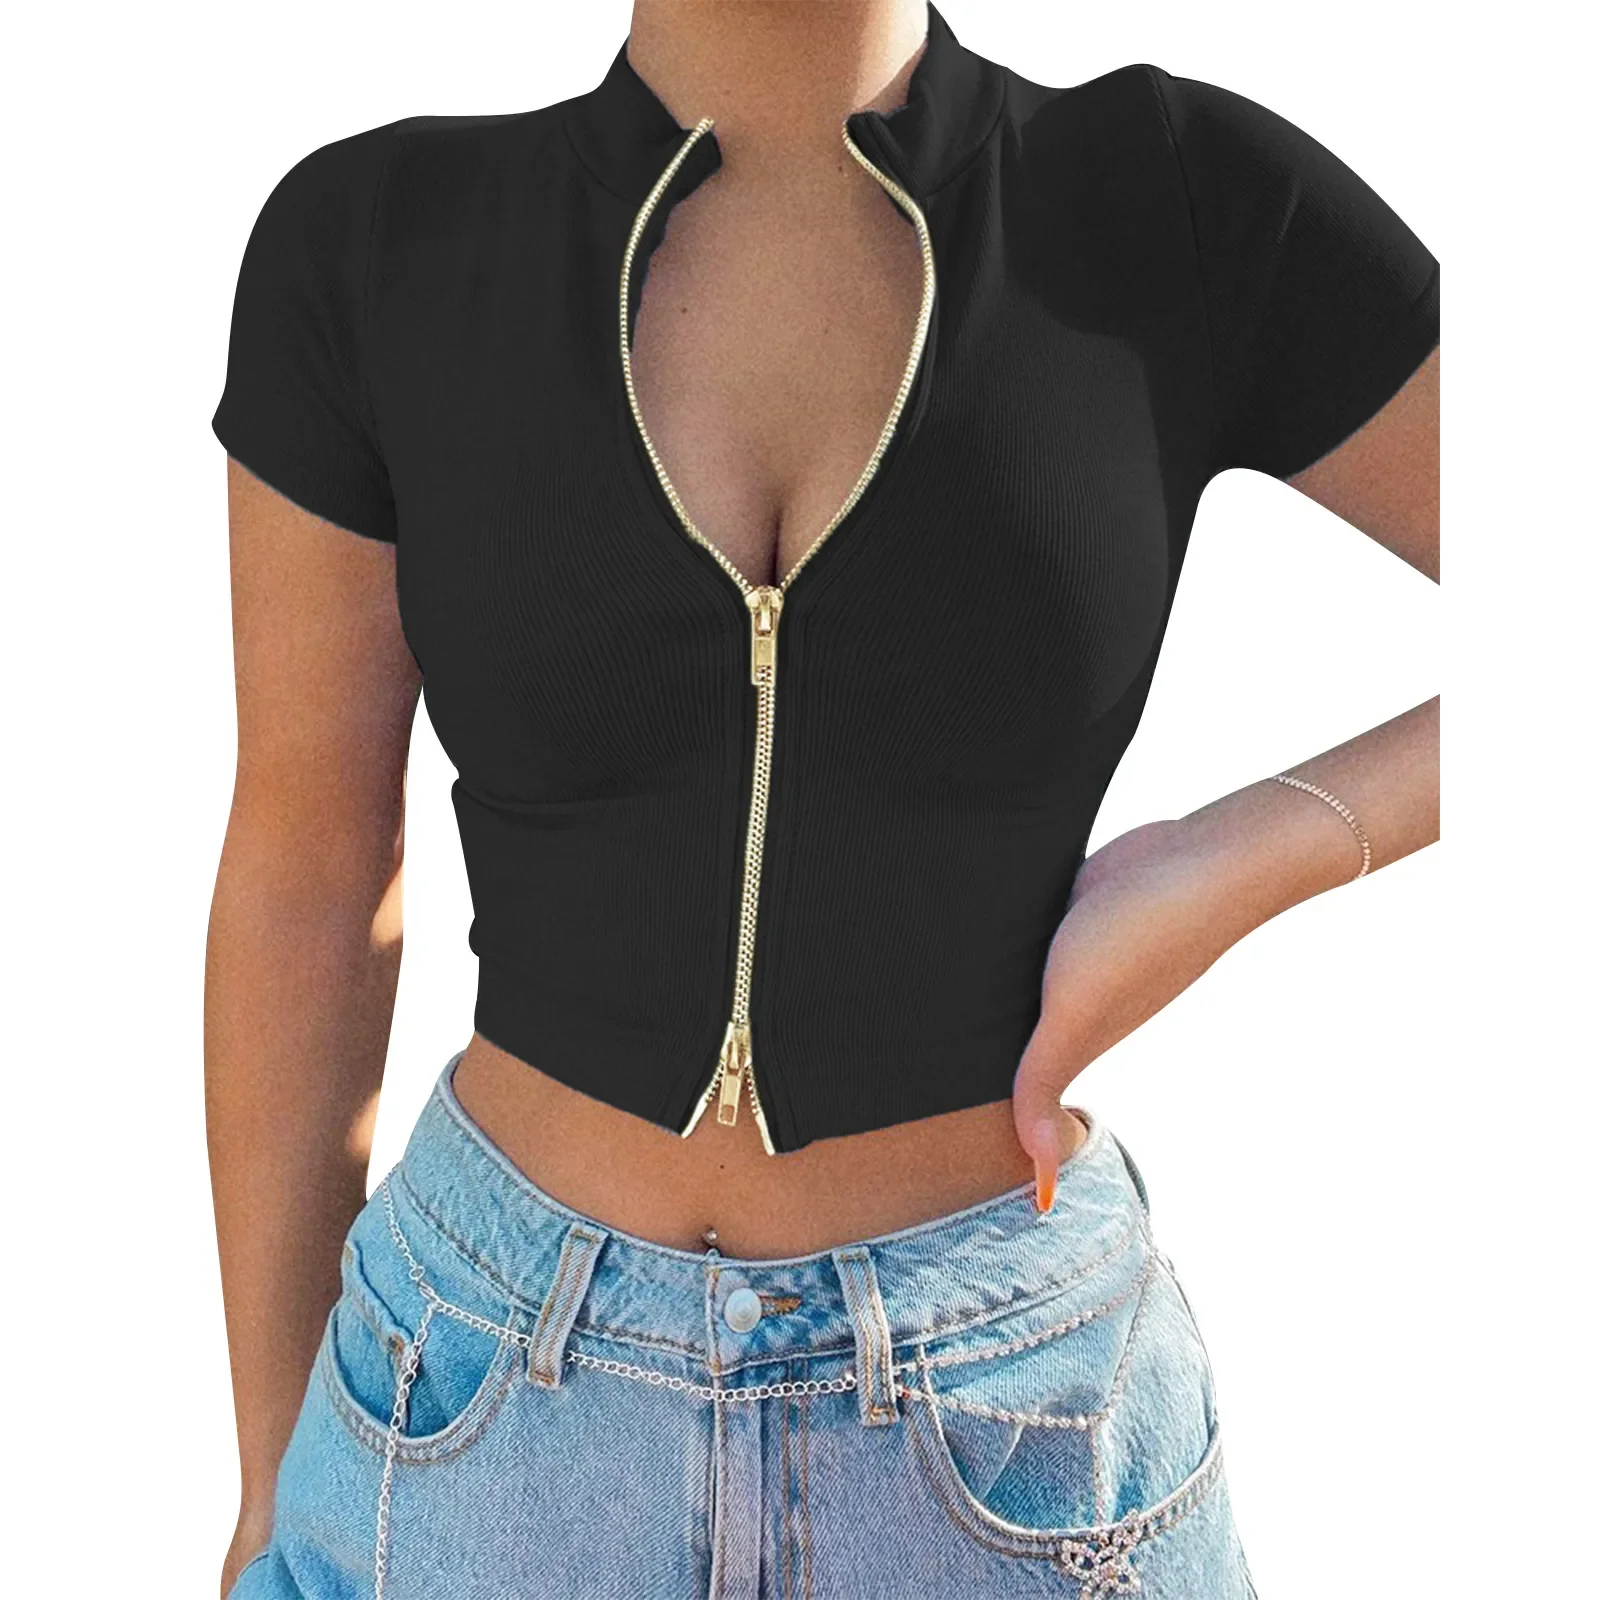 

Rib Knit Crop Tops Streetwear Short Sleeve Mock Neck Zip Up Solid Color Slim Fit T-Shirts Summer Club Party Tops